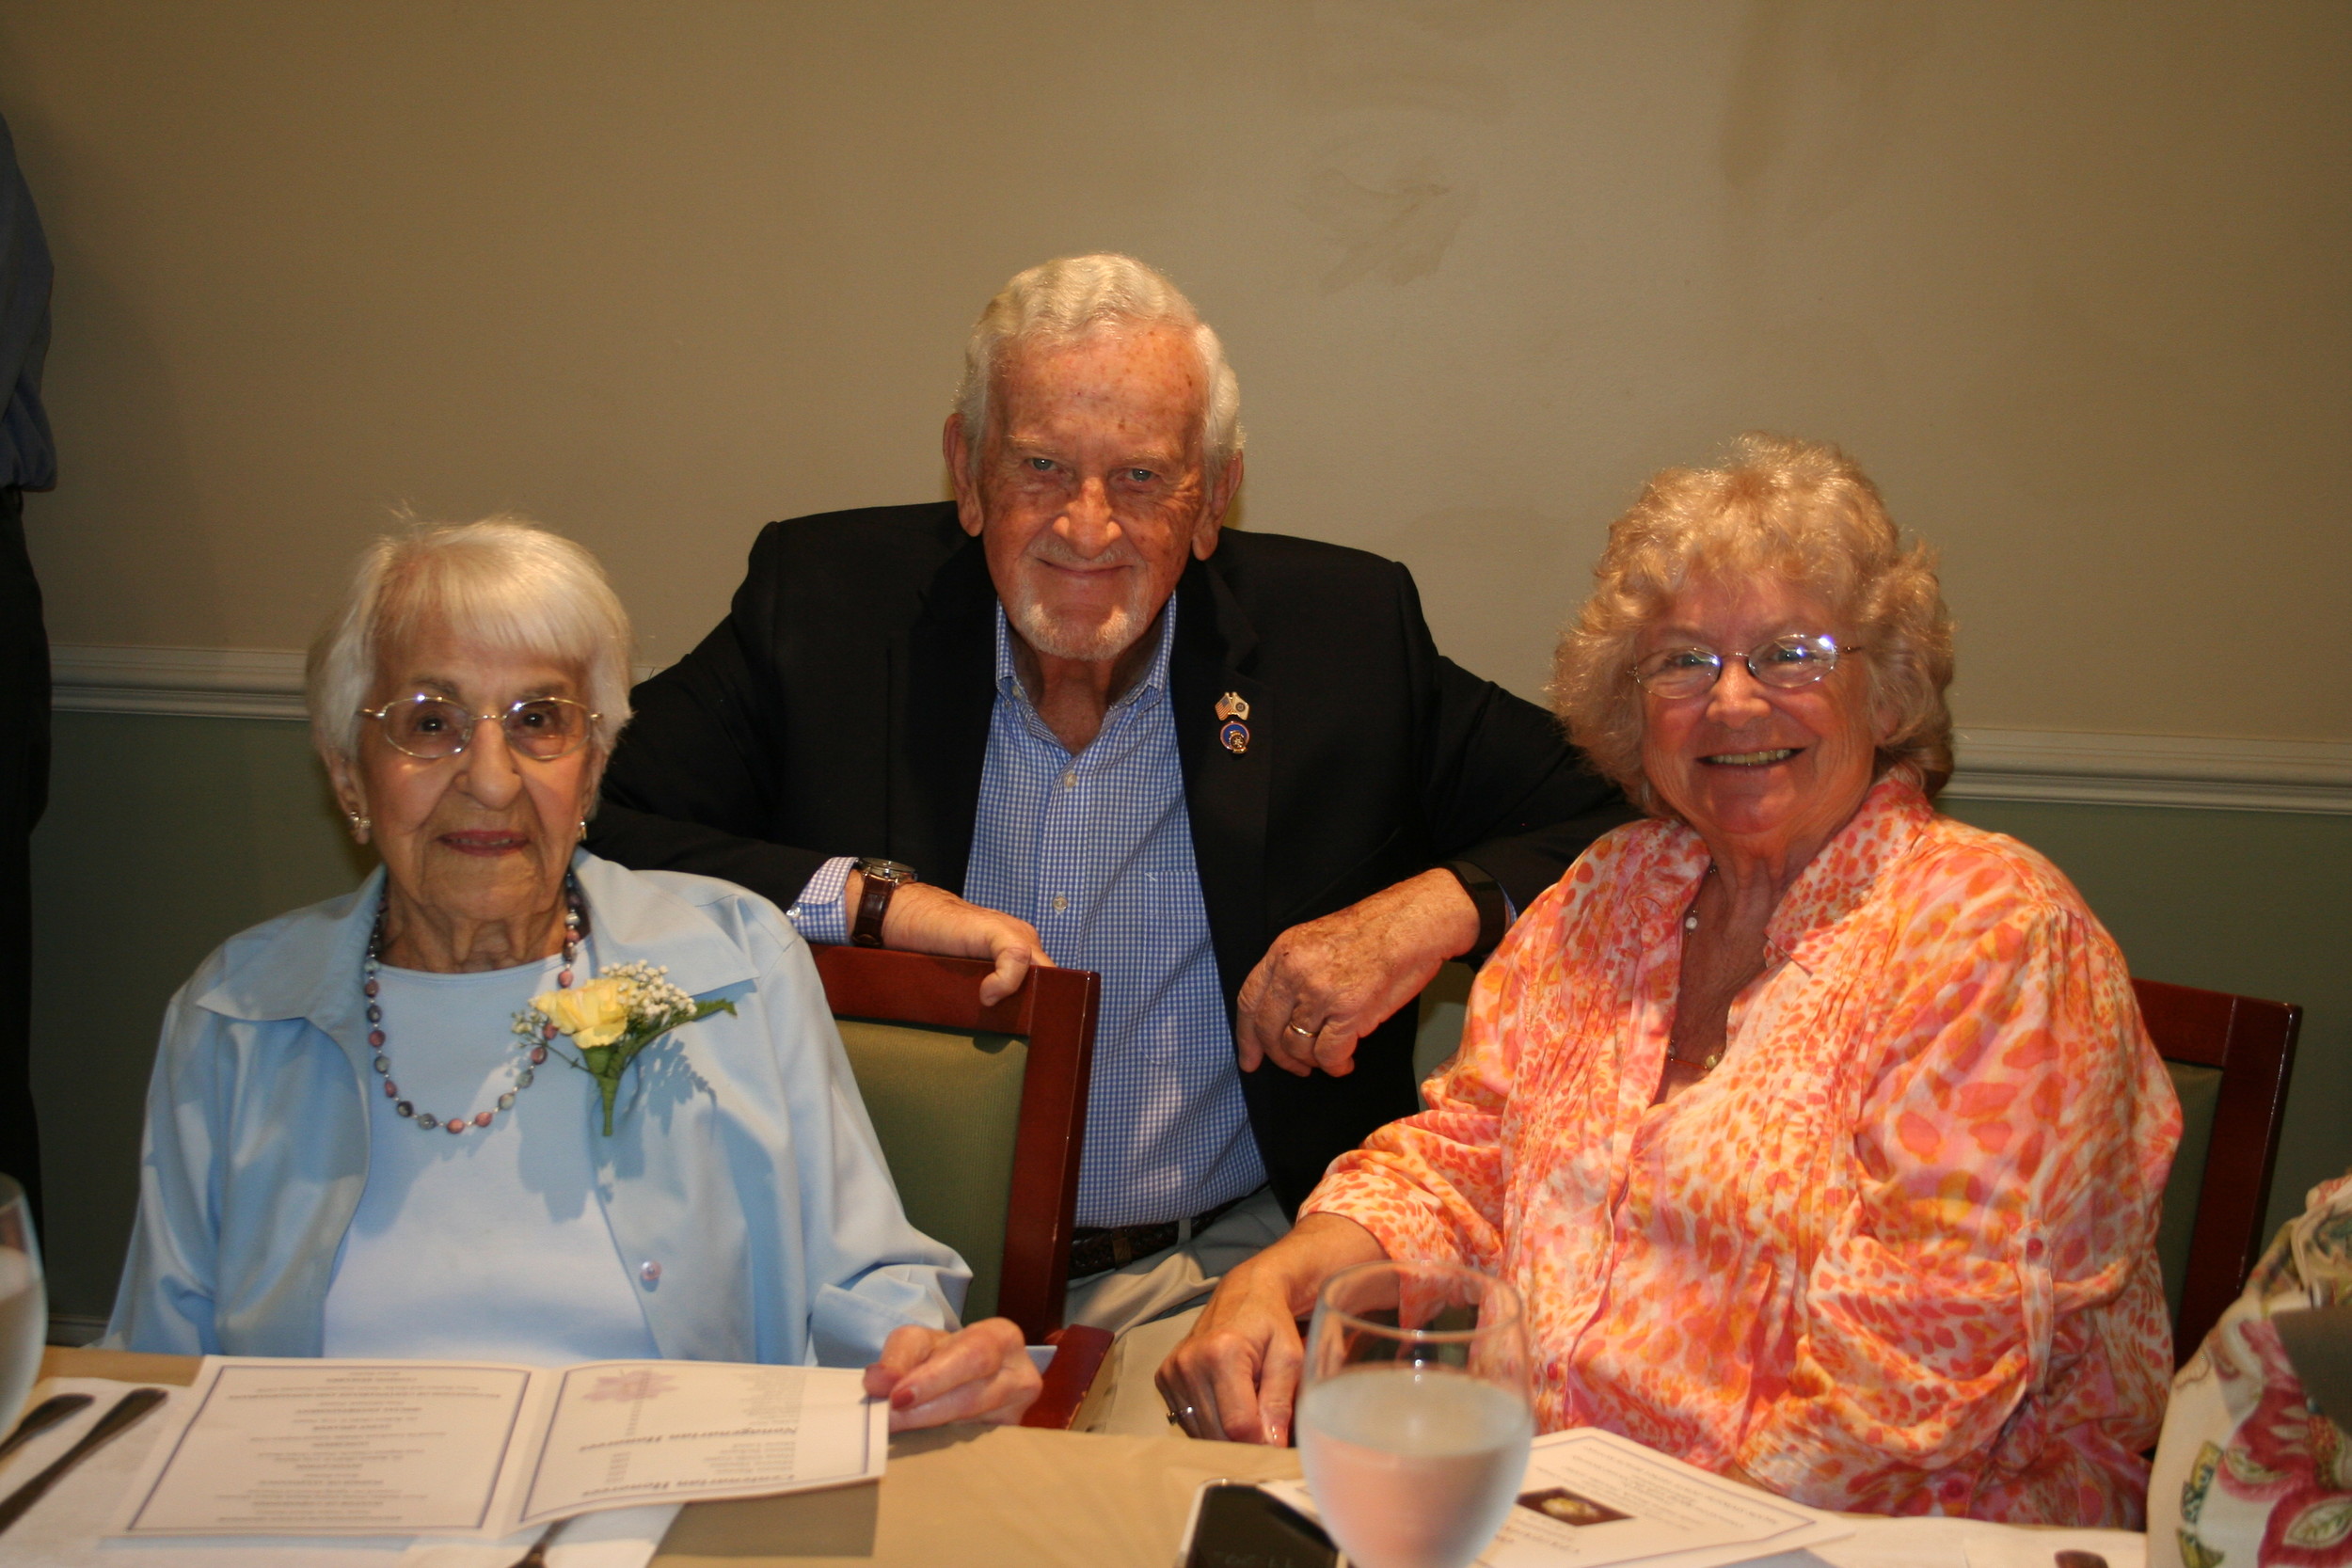 Nonagenarian honoree, Delia Danzig, 96, with Rotary Club of Ponte Vedra member, Ken Smith, and Danzig’s daughter-in-law, Purdie Meissner